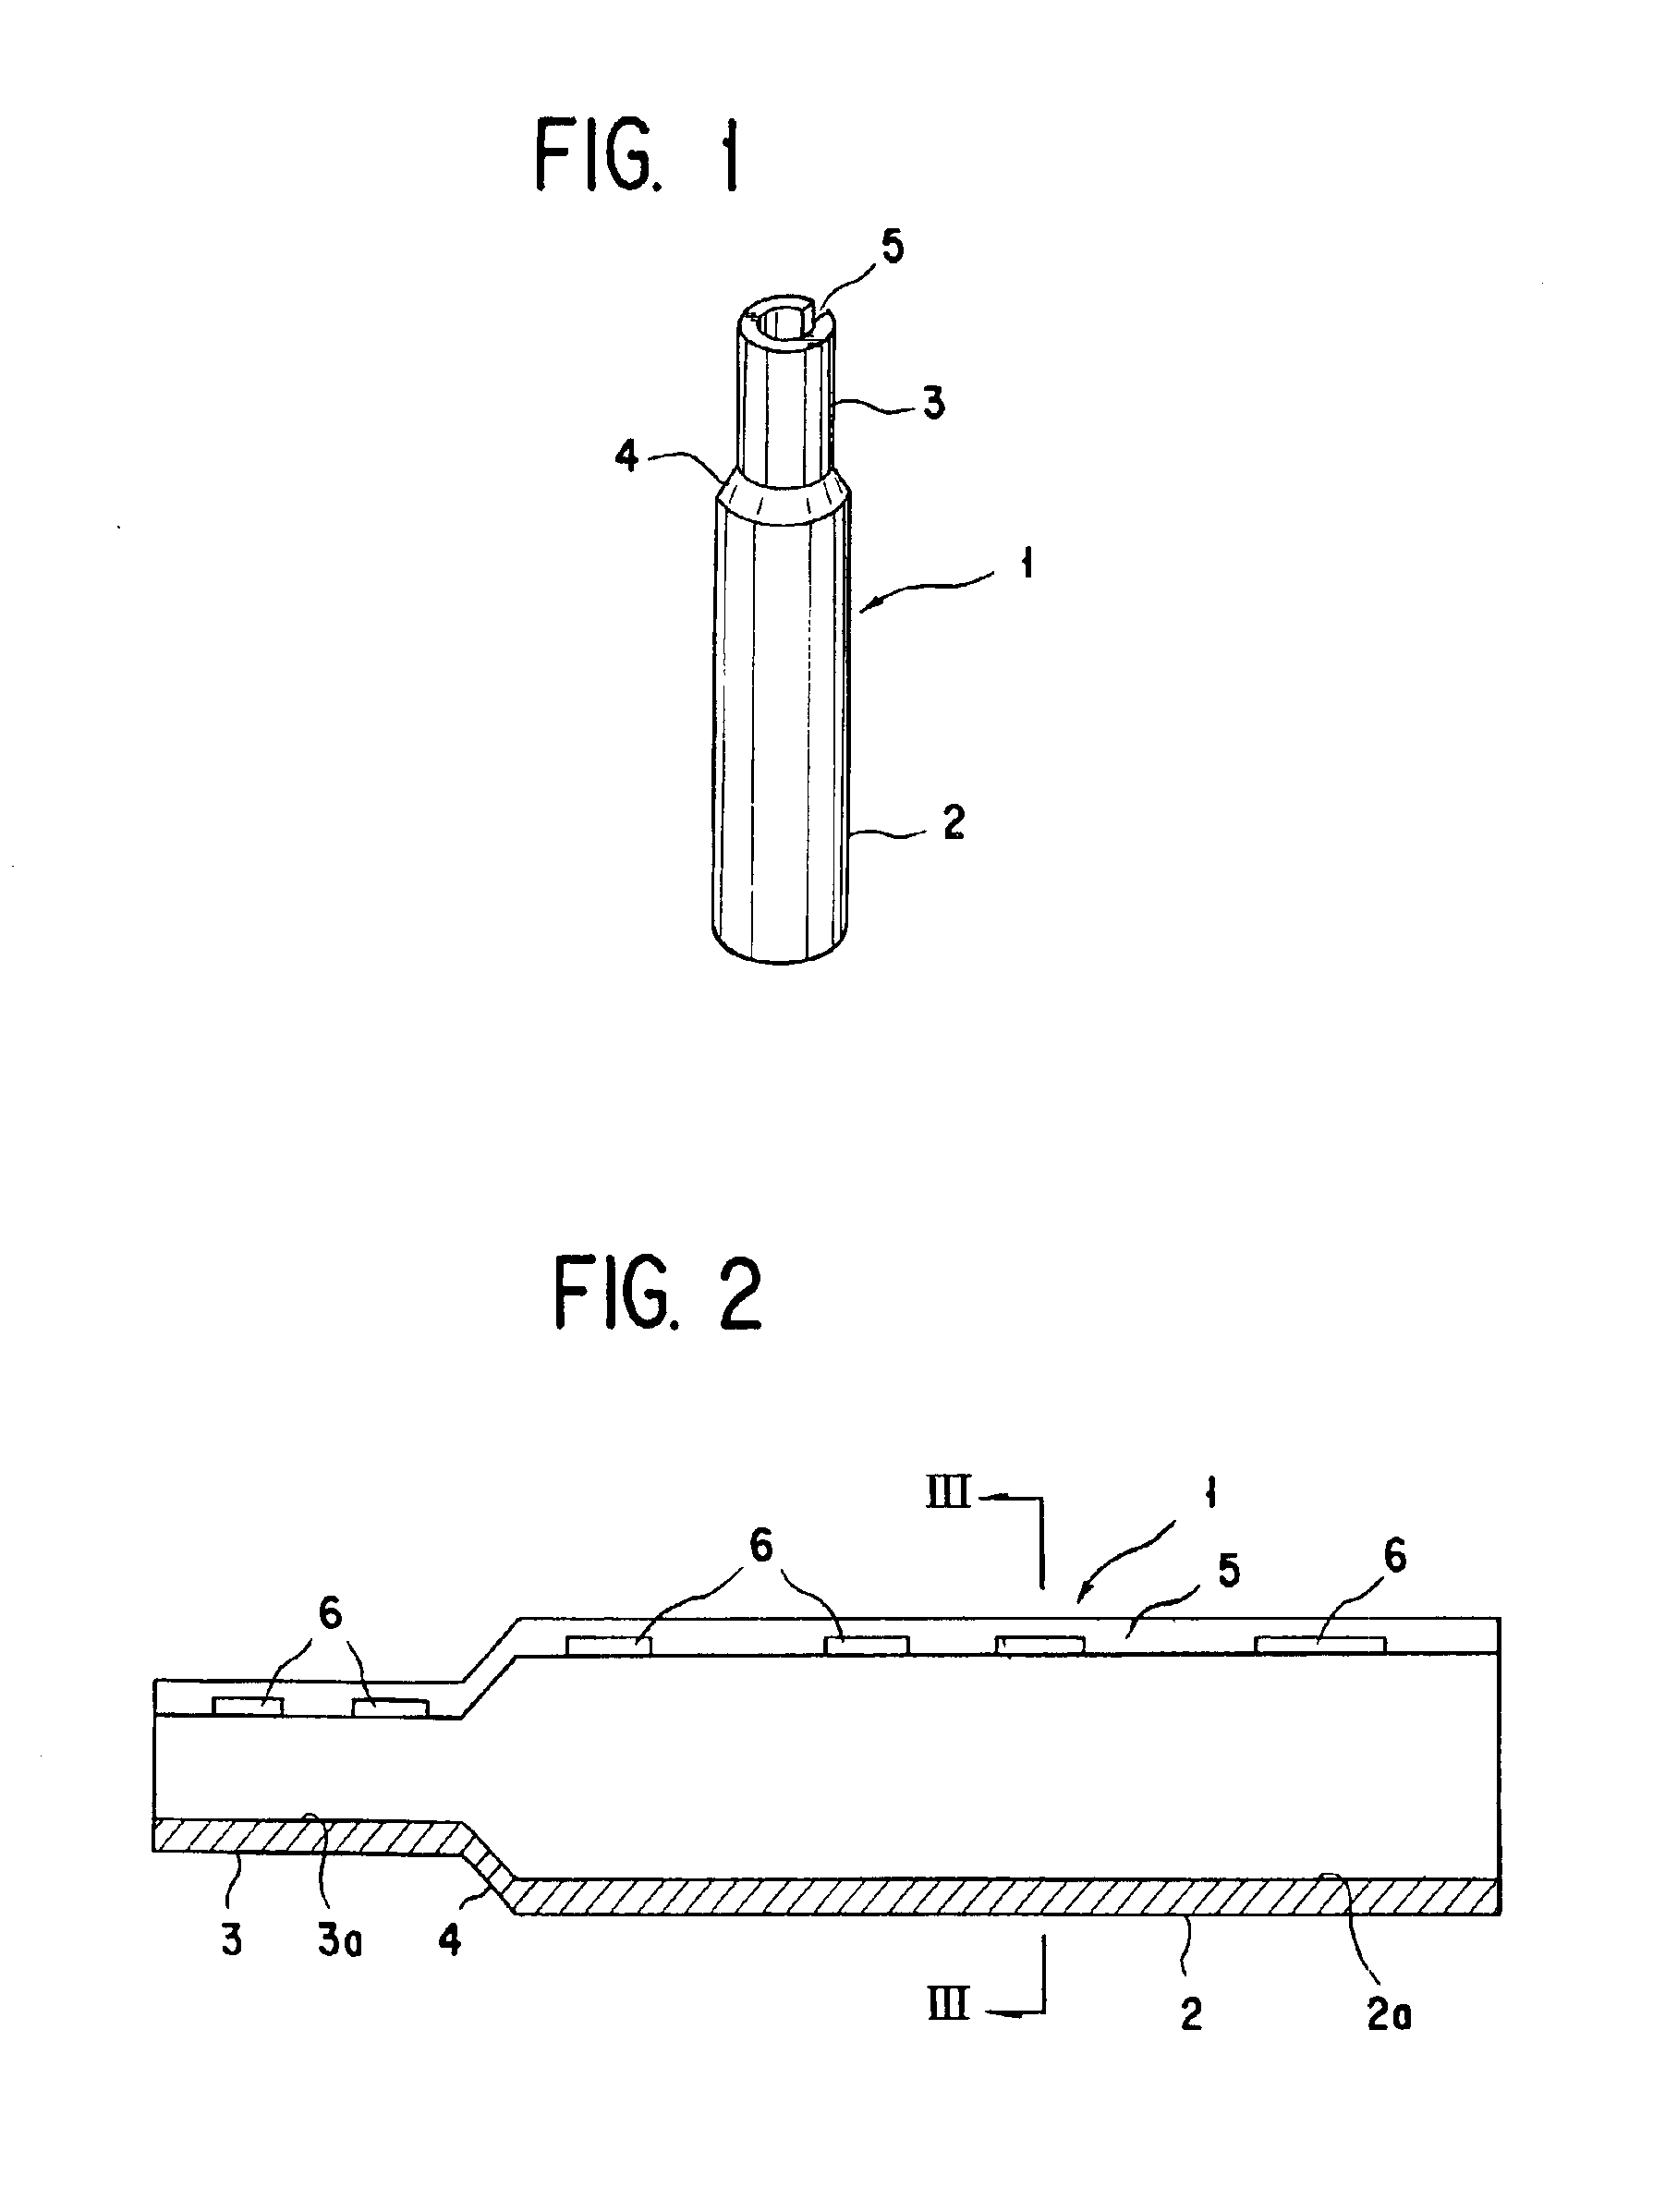 Hollow cast article with slit, method and apparatus for production thereof